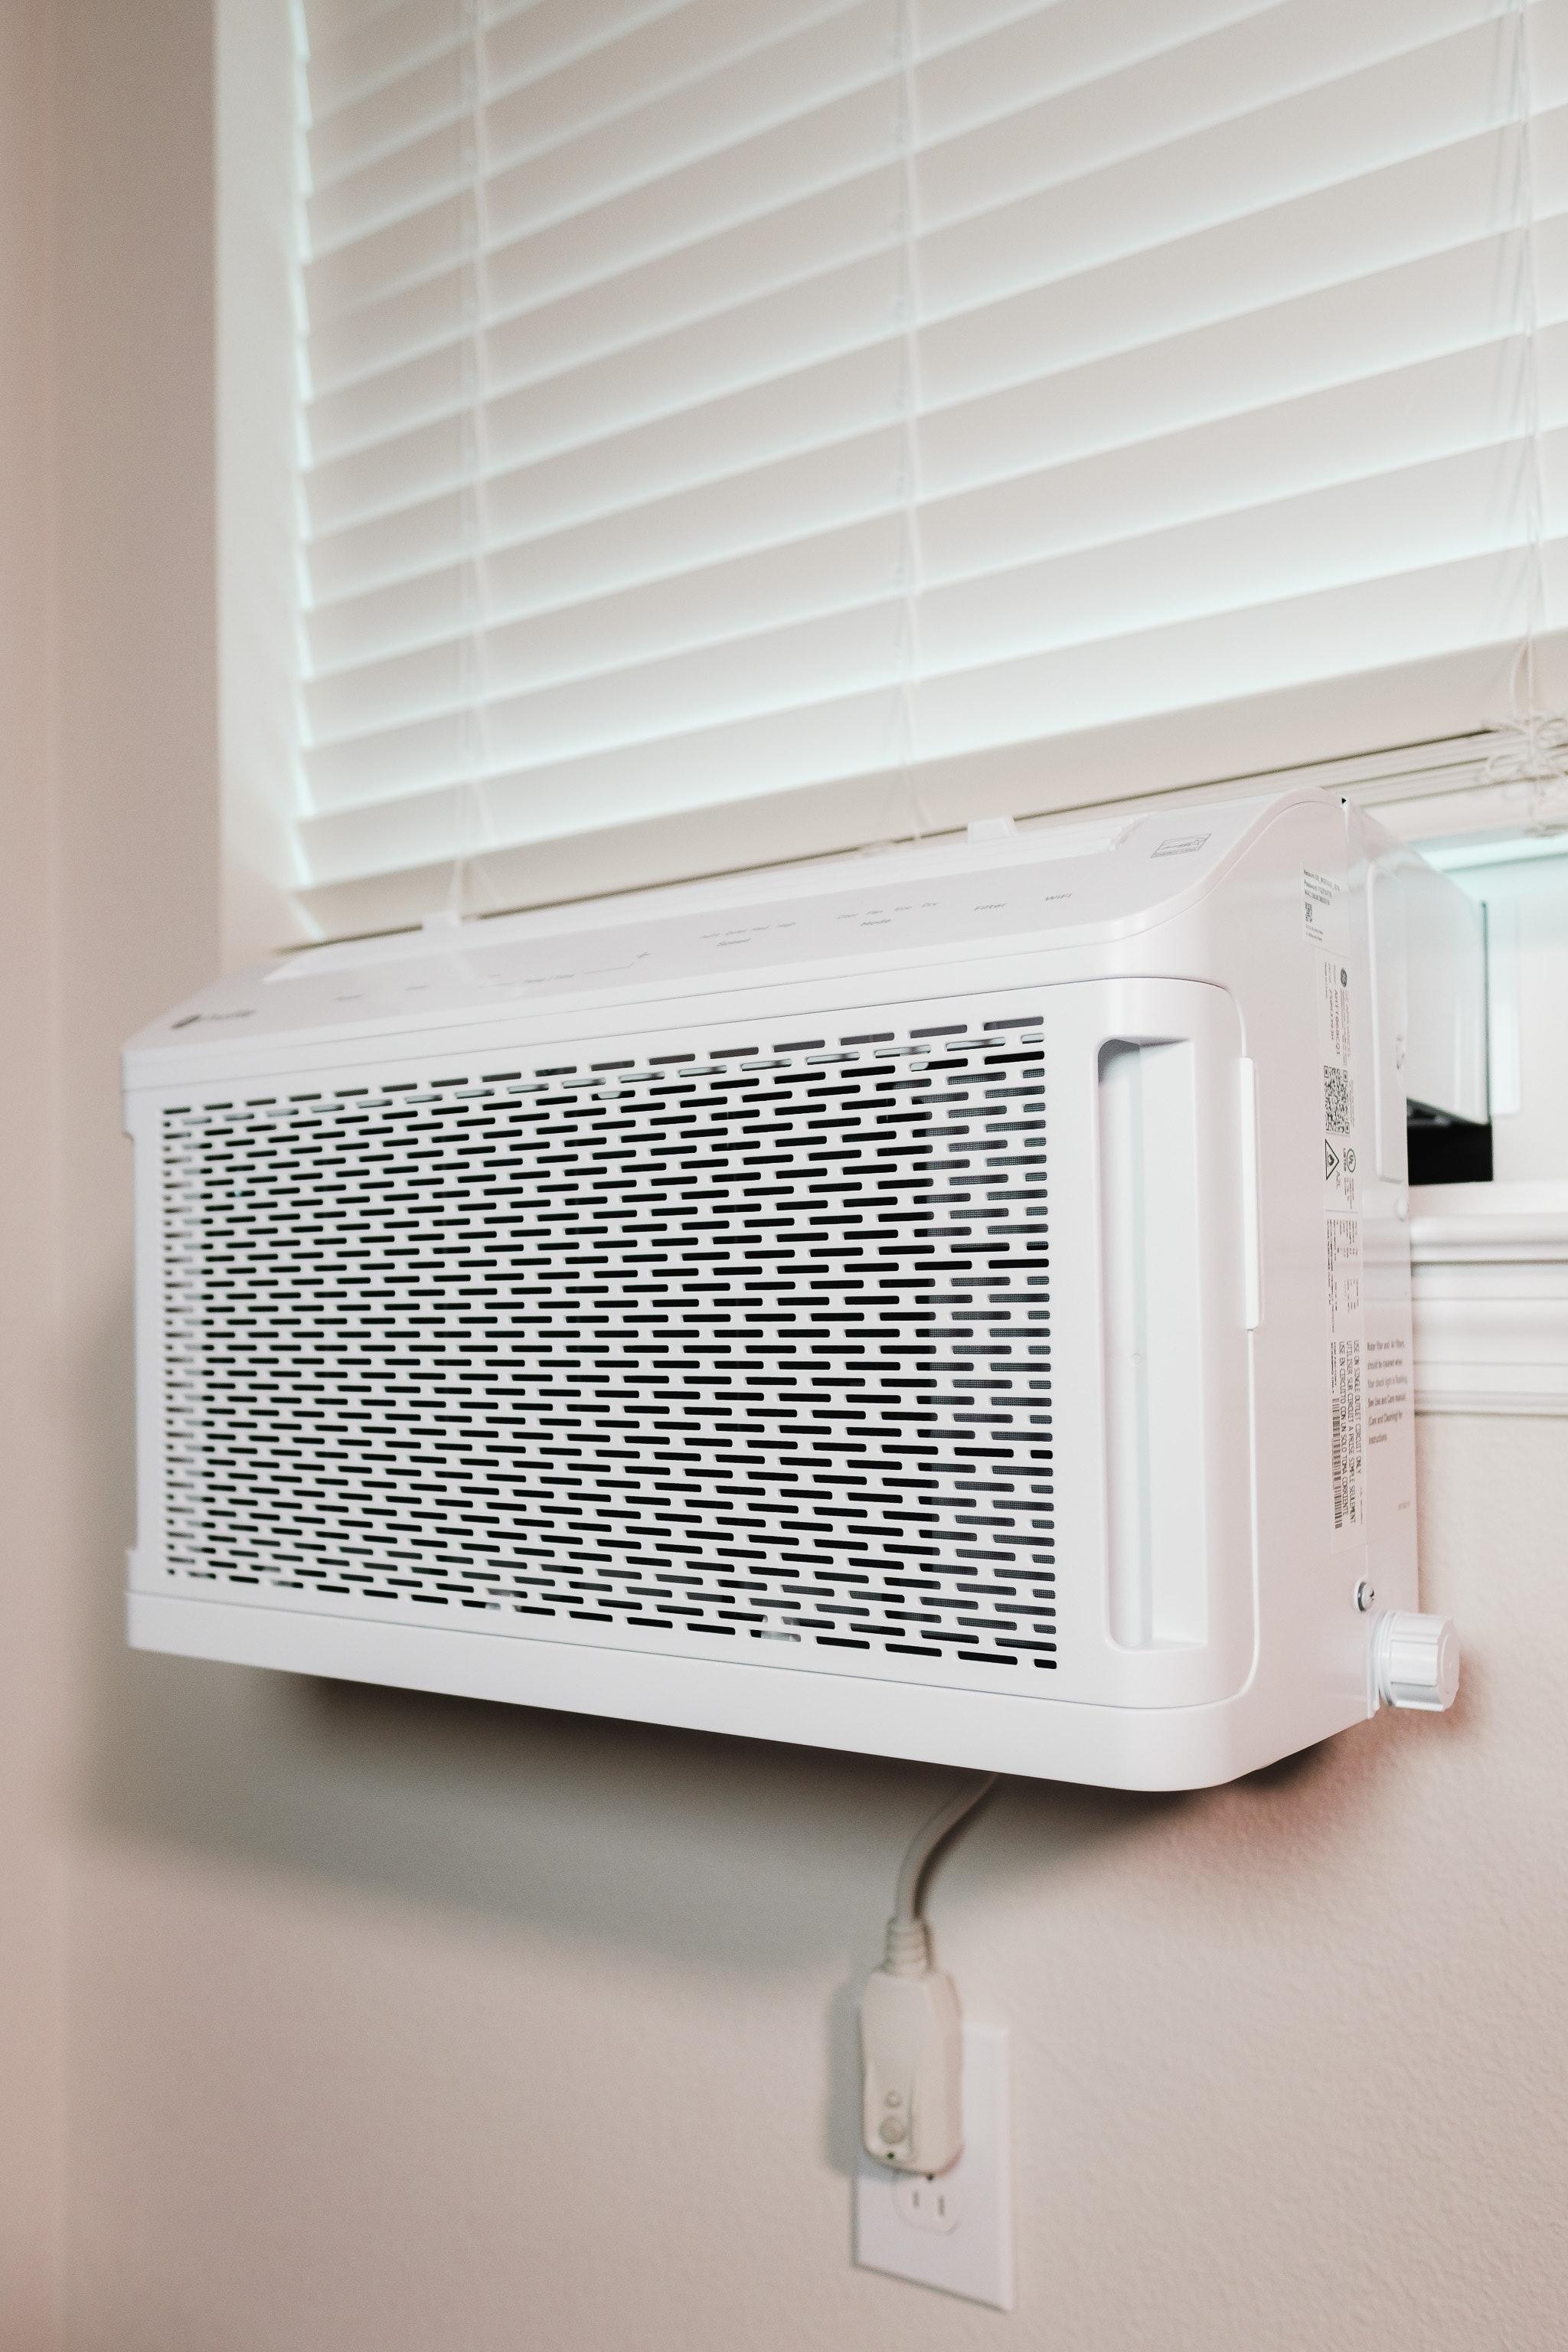 How To Block Light From Window Ac Unit 